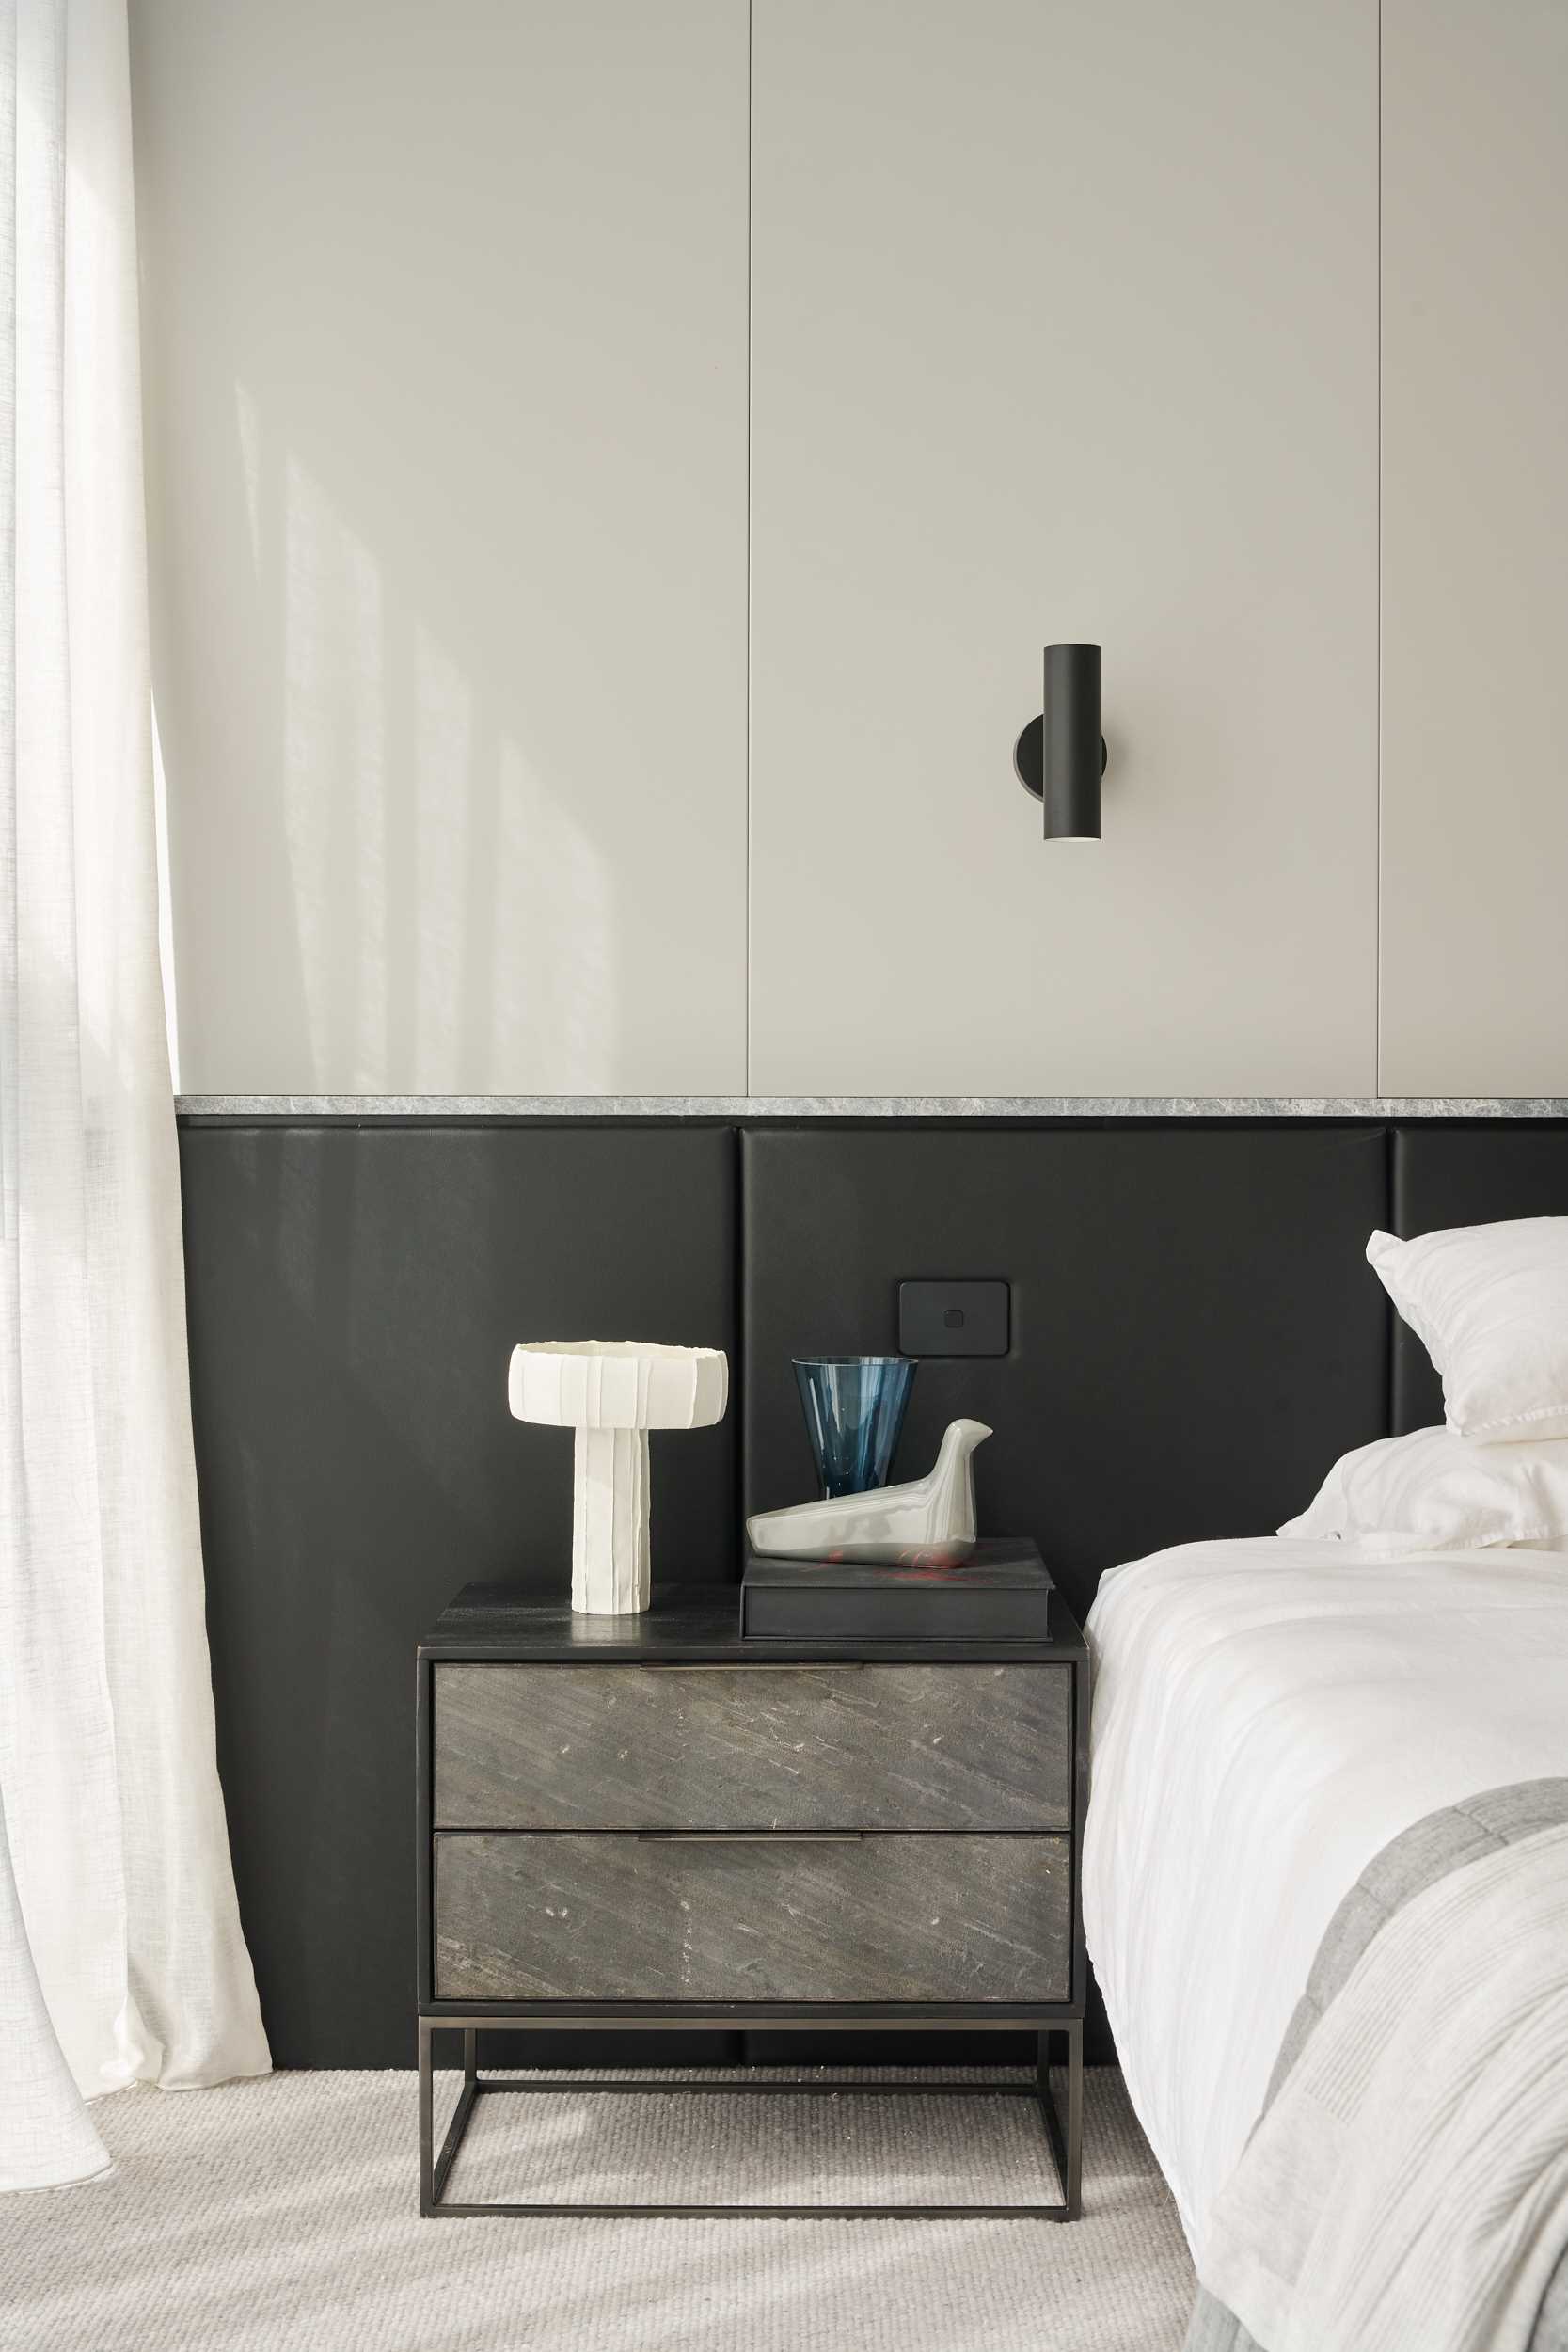 In this modern bedroom, a padded black headboard spans the room, while carpet is chosen flooring material.